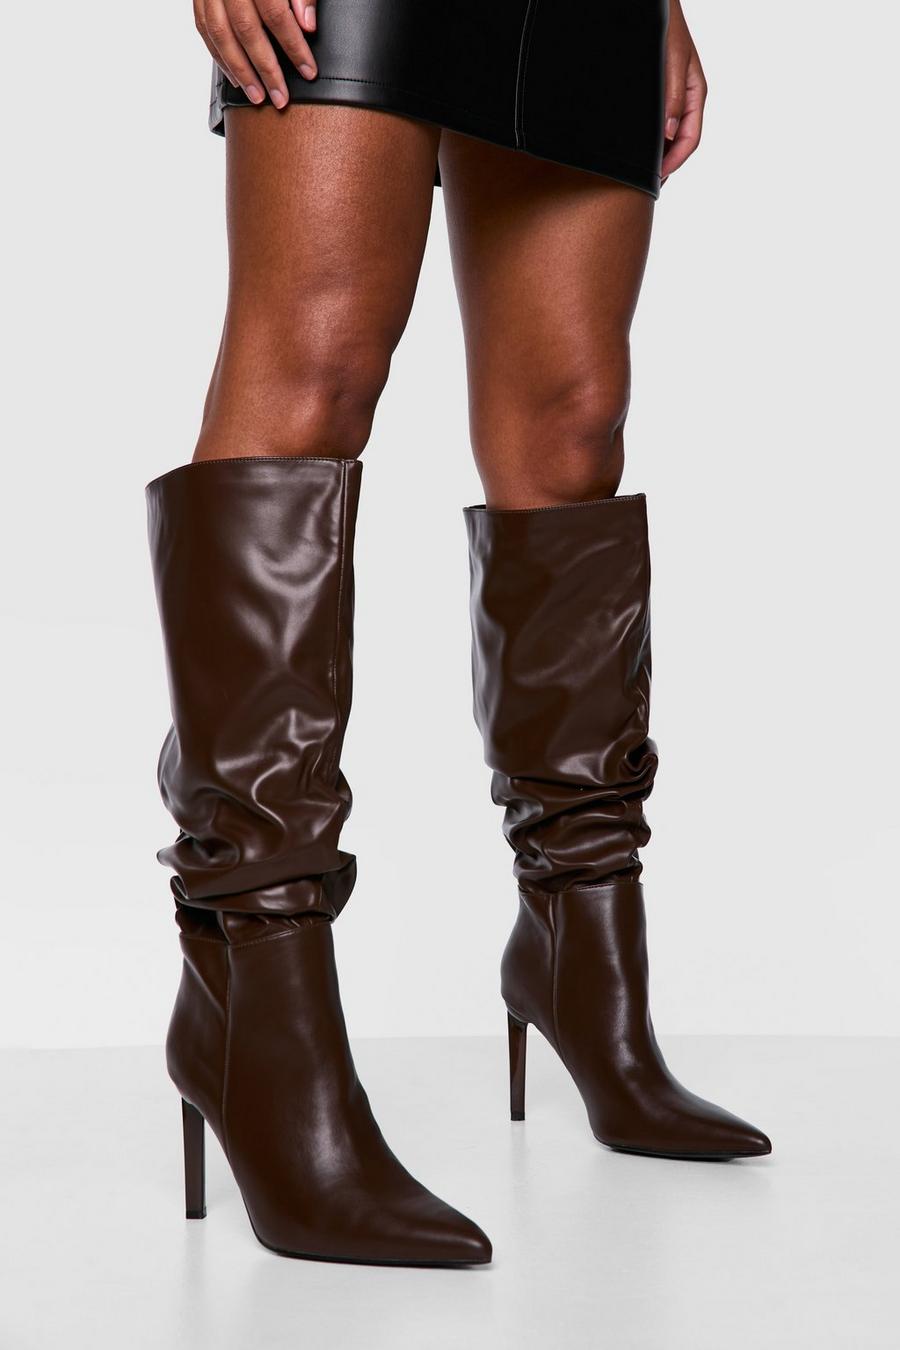 Chocolate brown Wide Width Ruched Stiletto Pointed Toe Boots